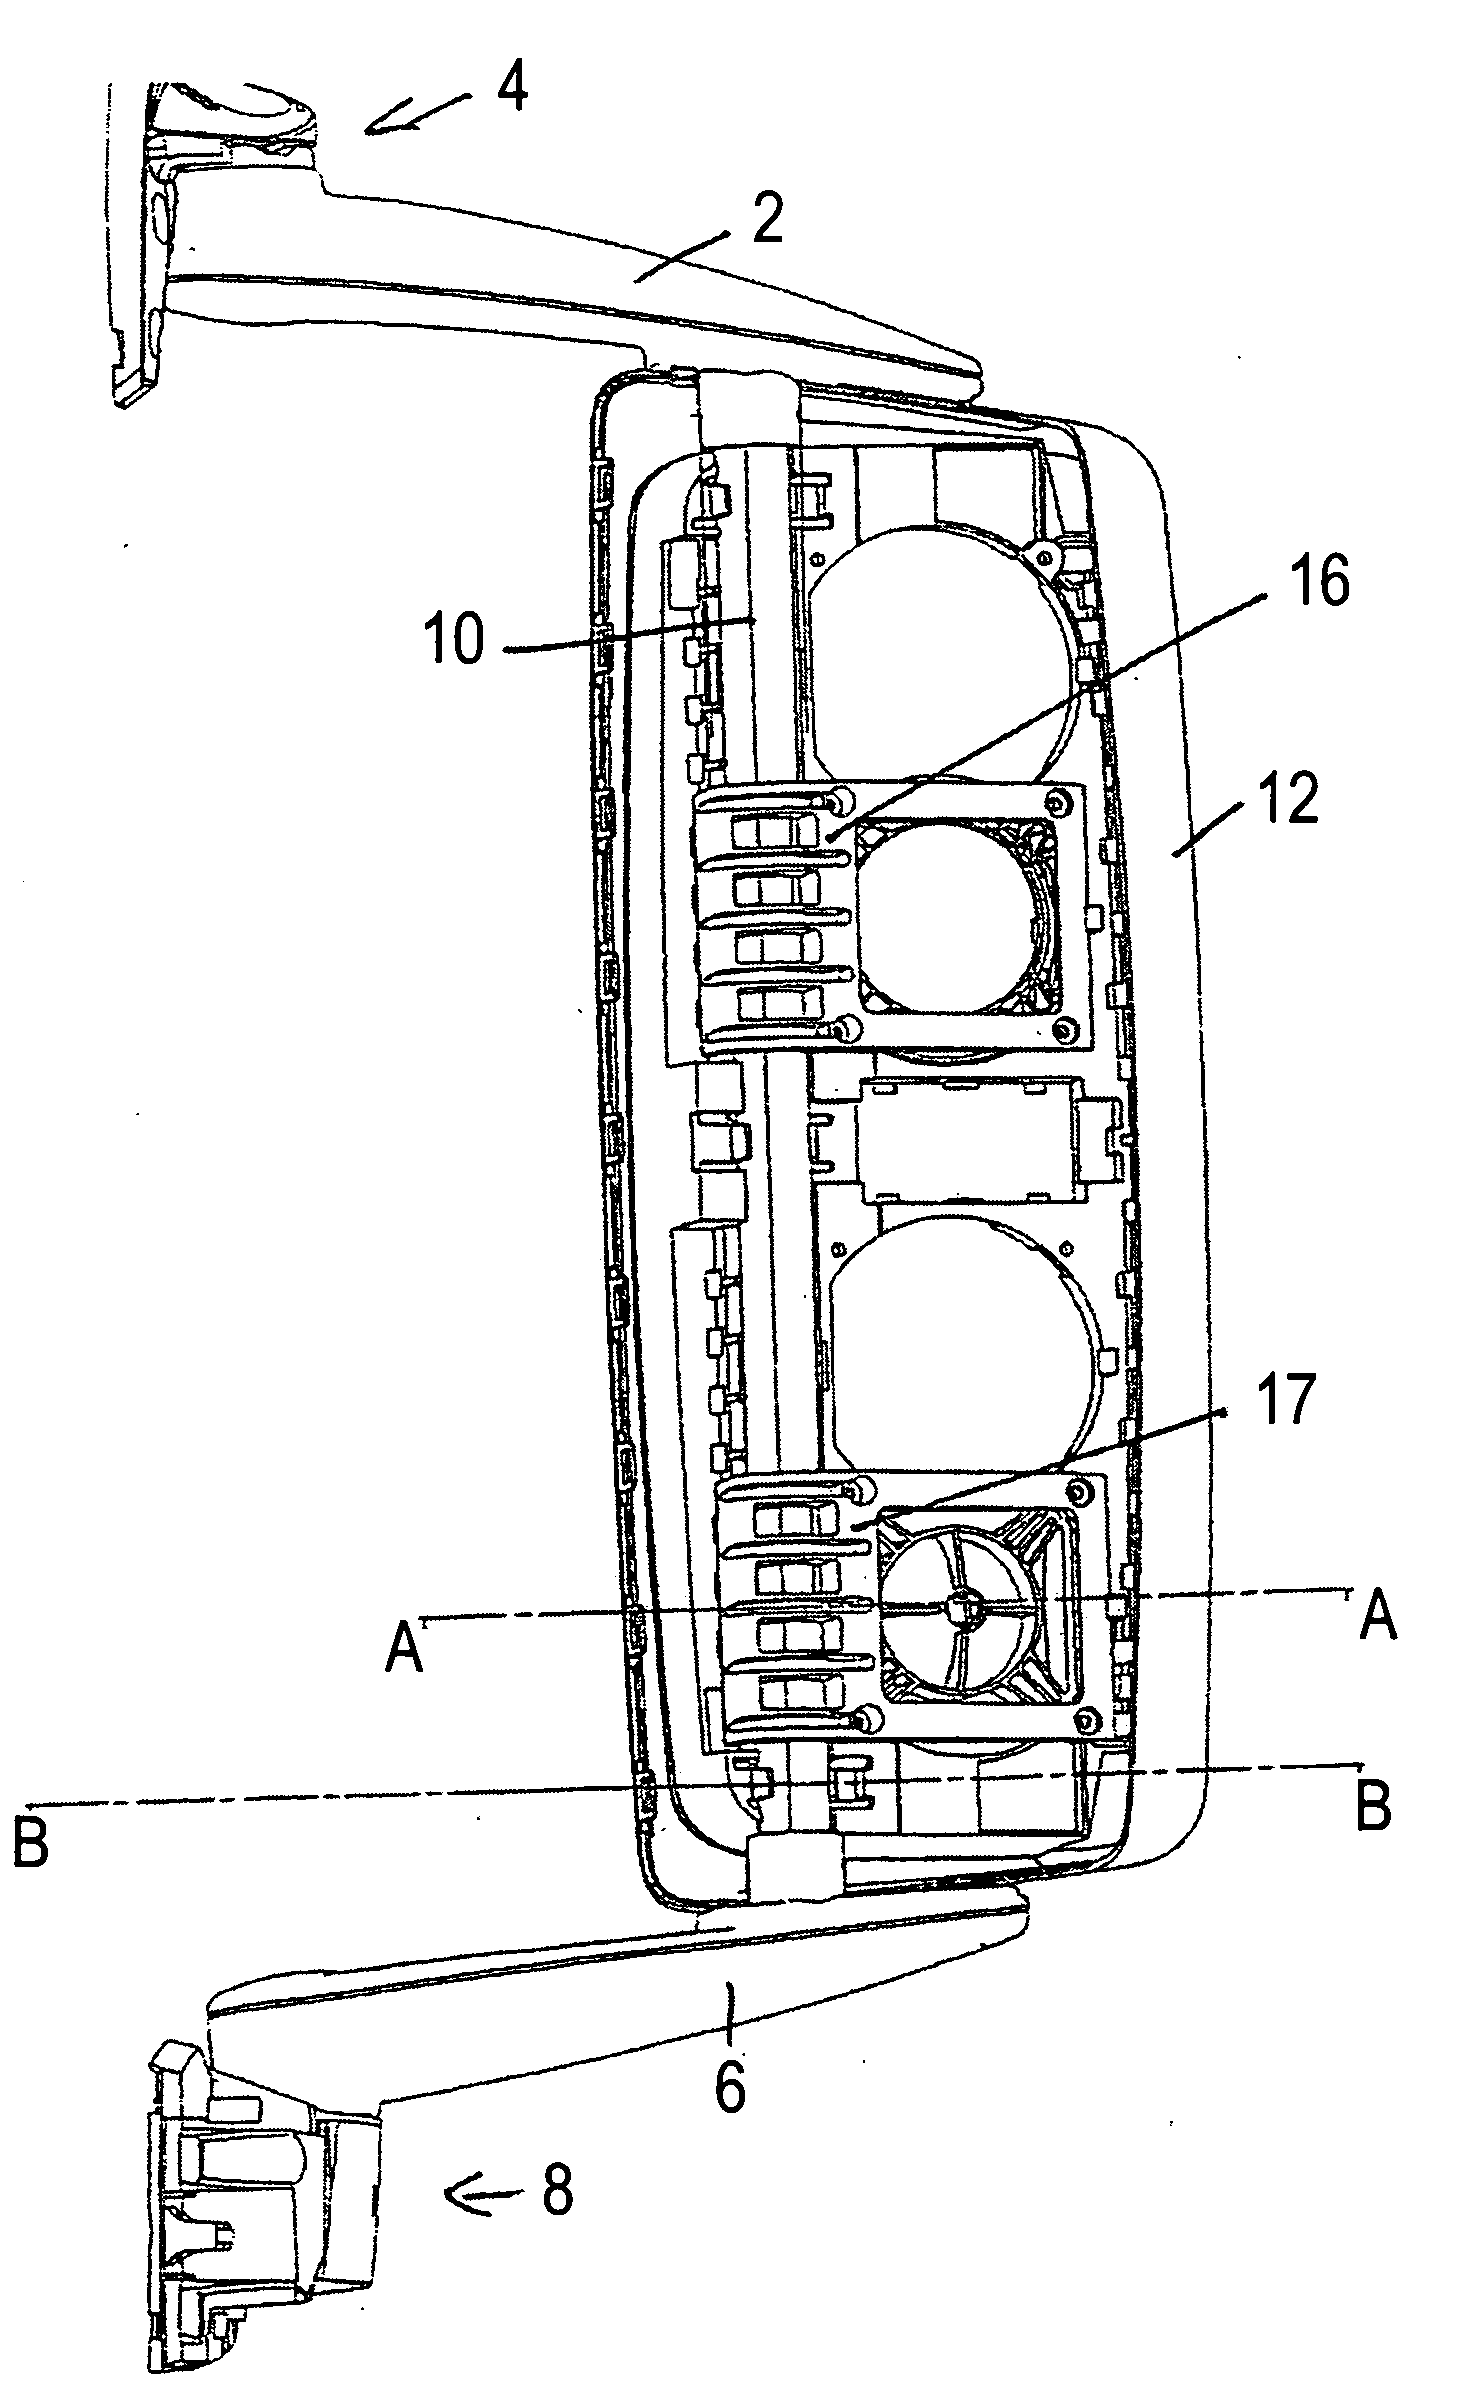 Vehicle mirror support assembly with cast brace